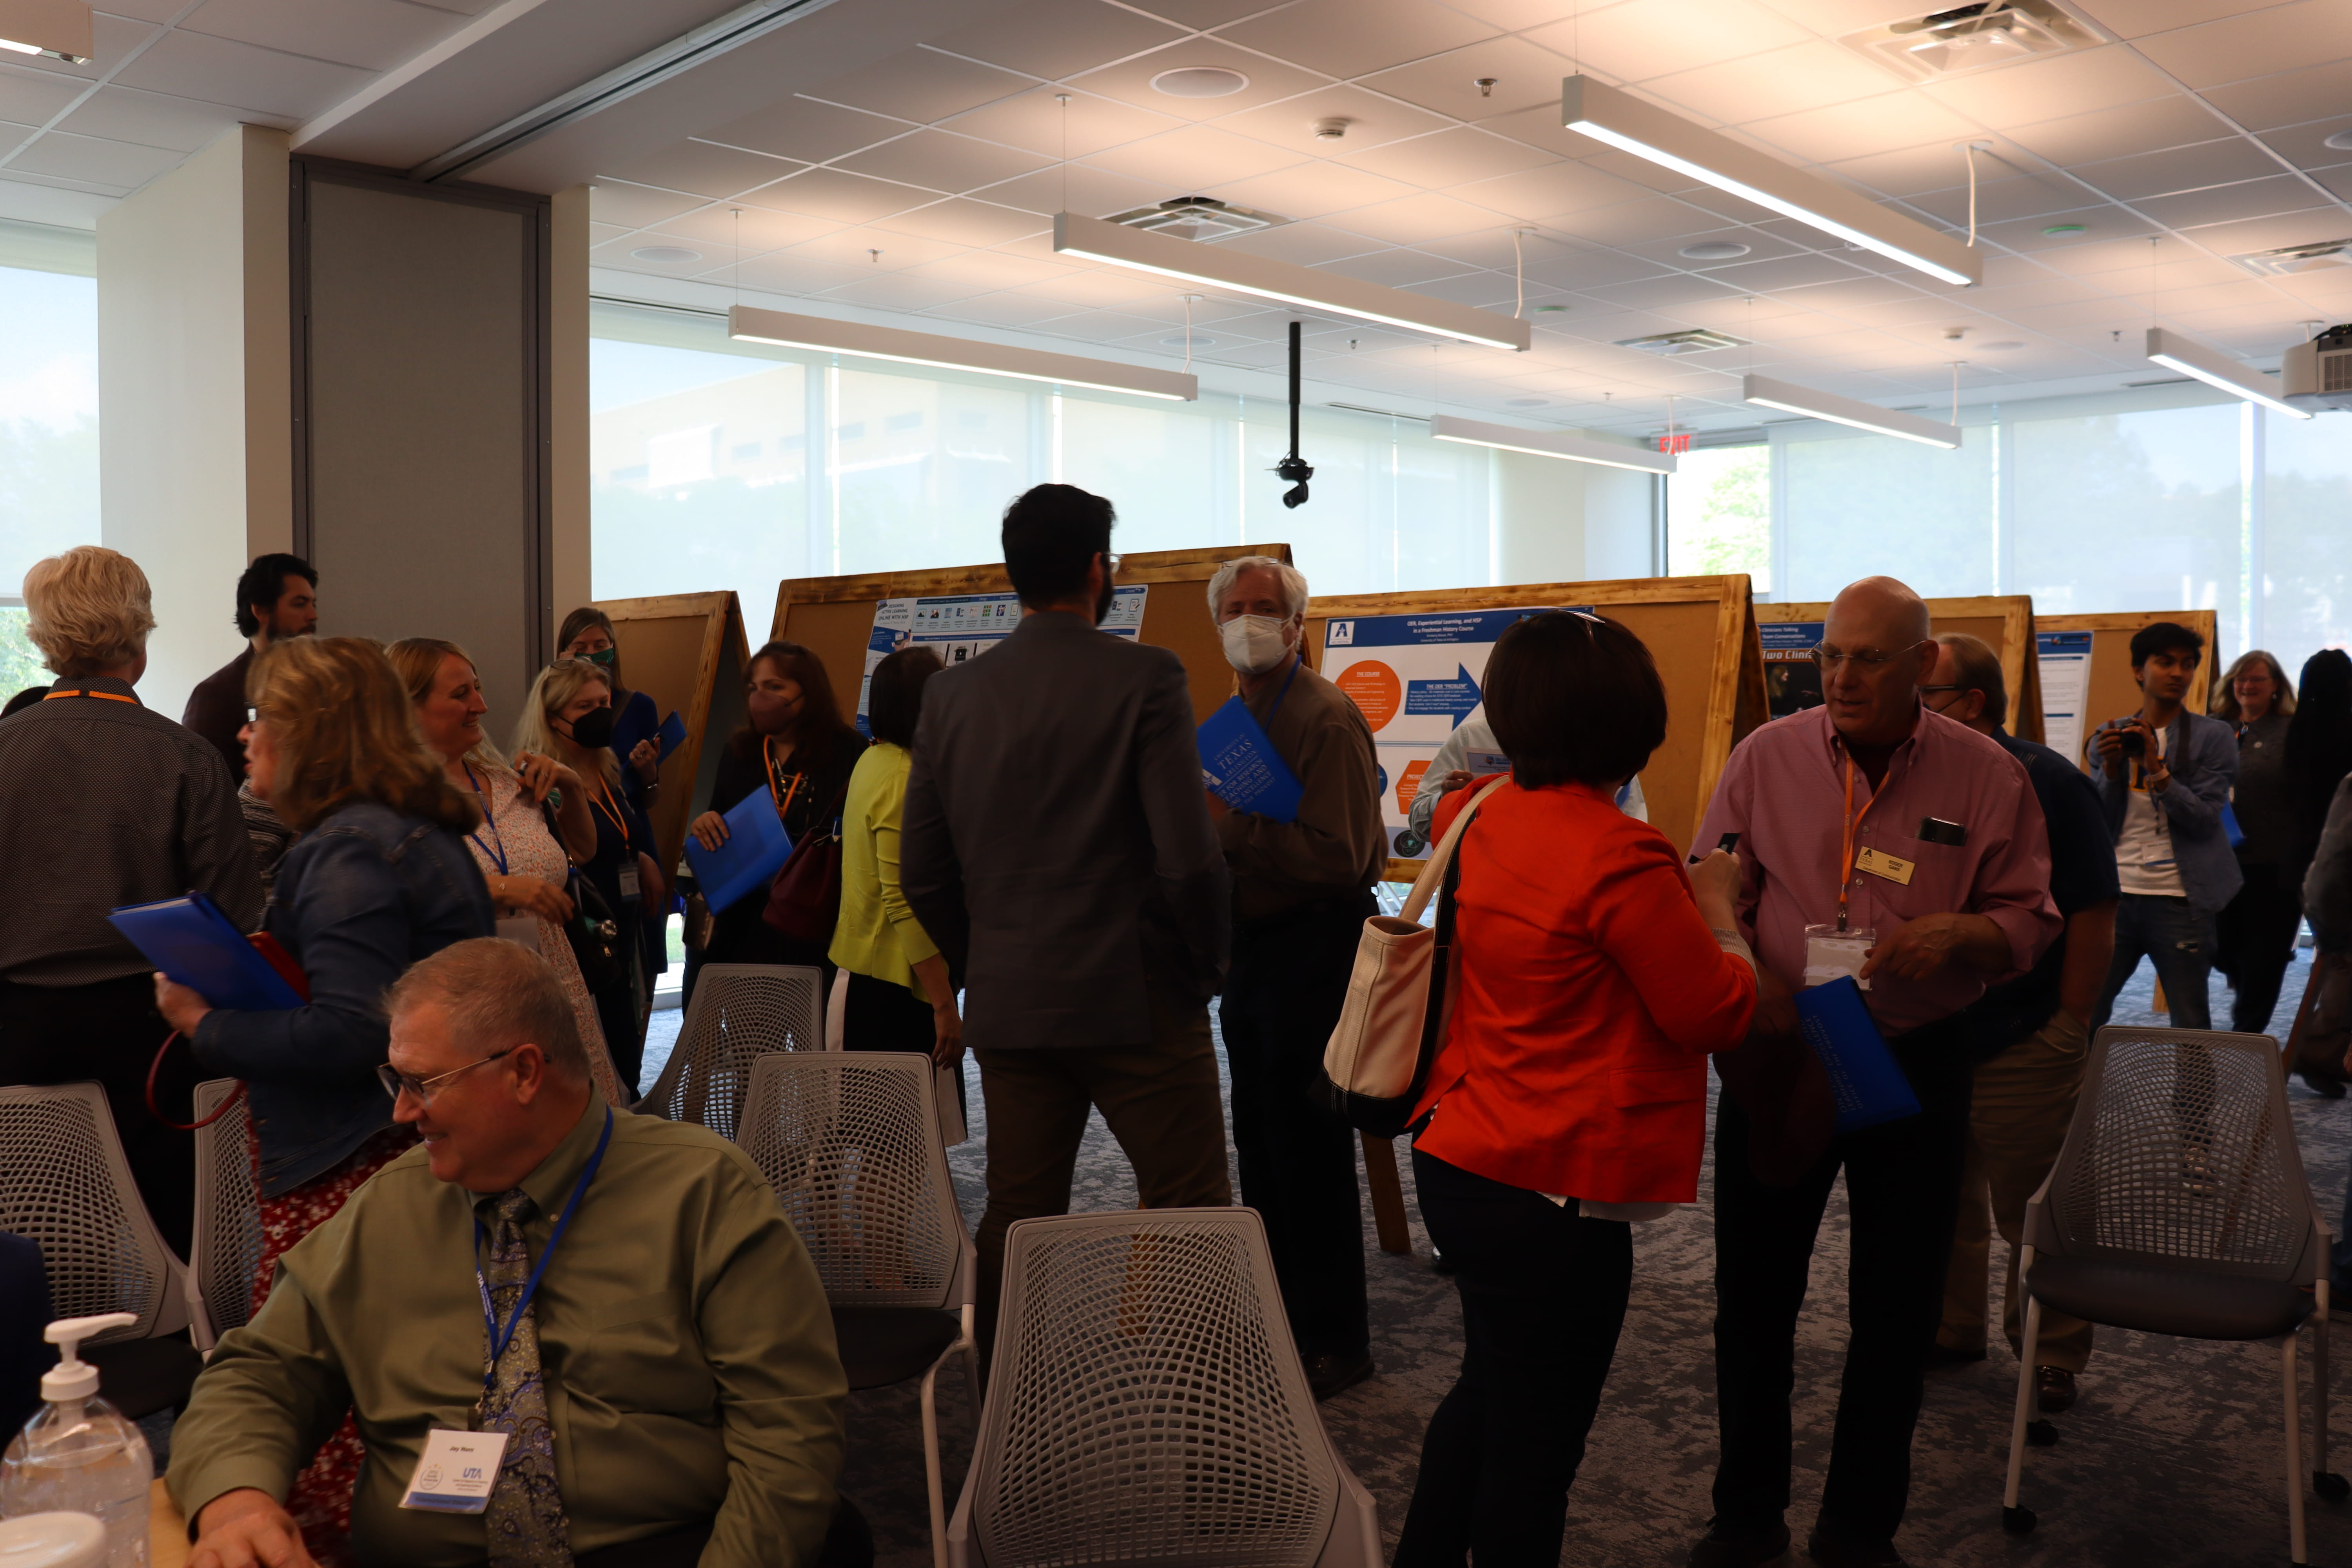 Group of people at conference poster session